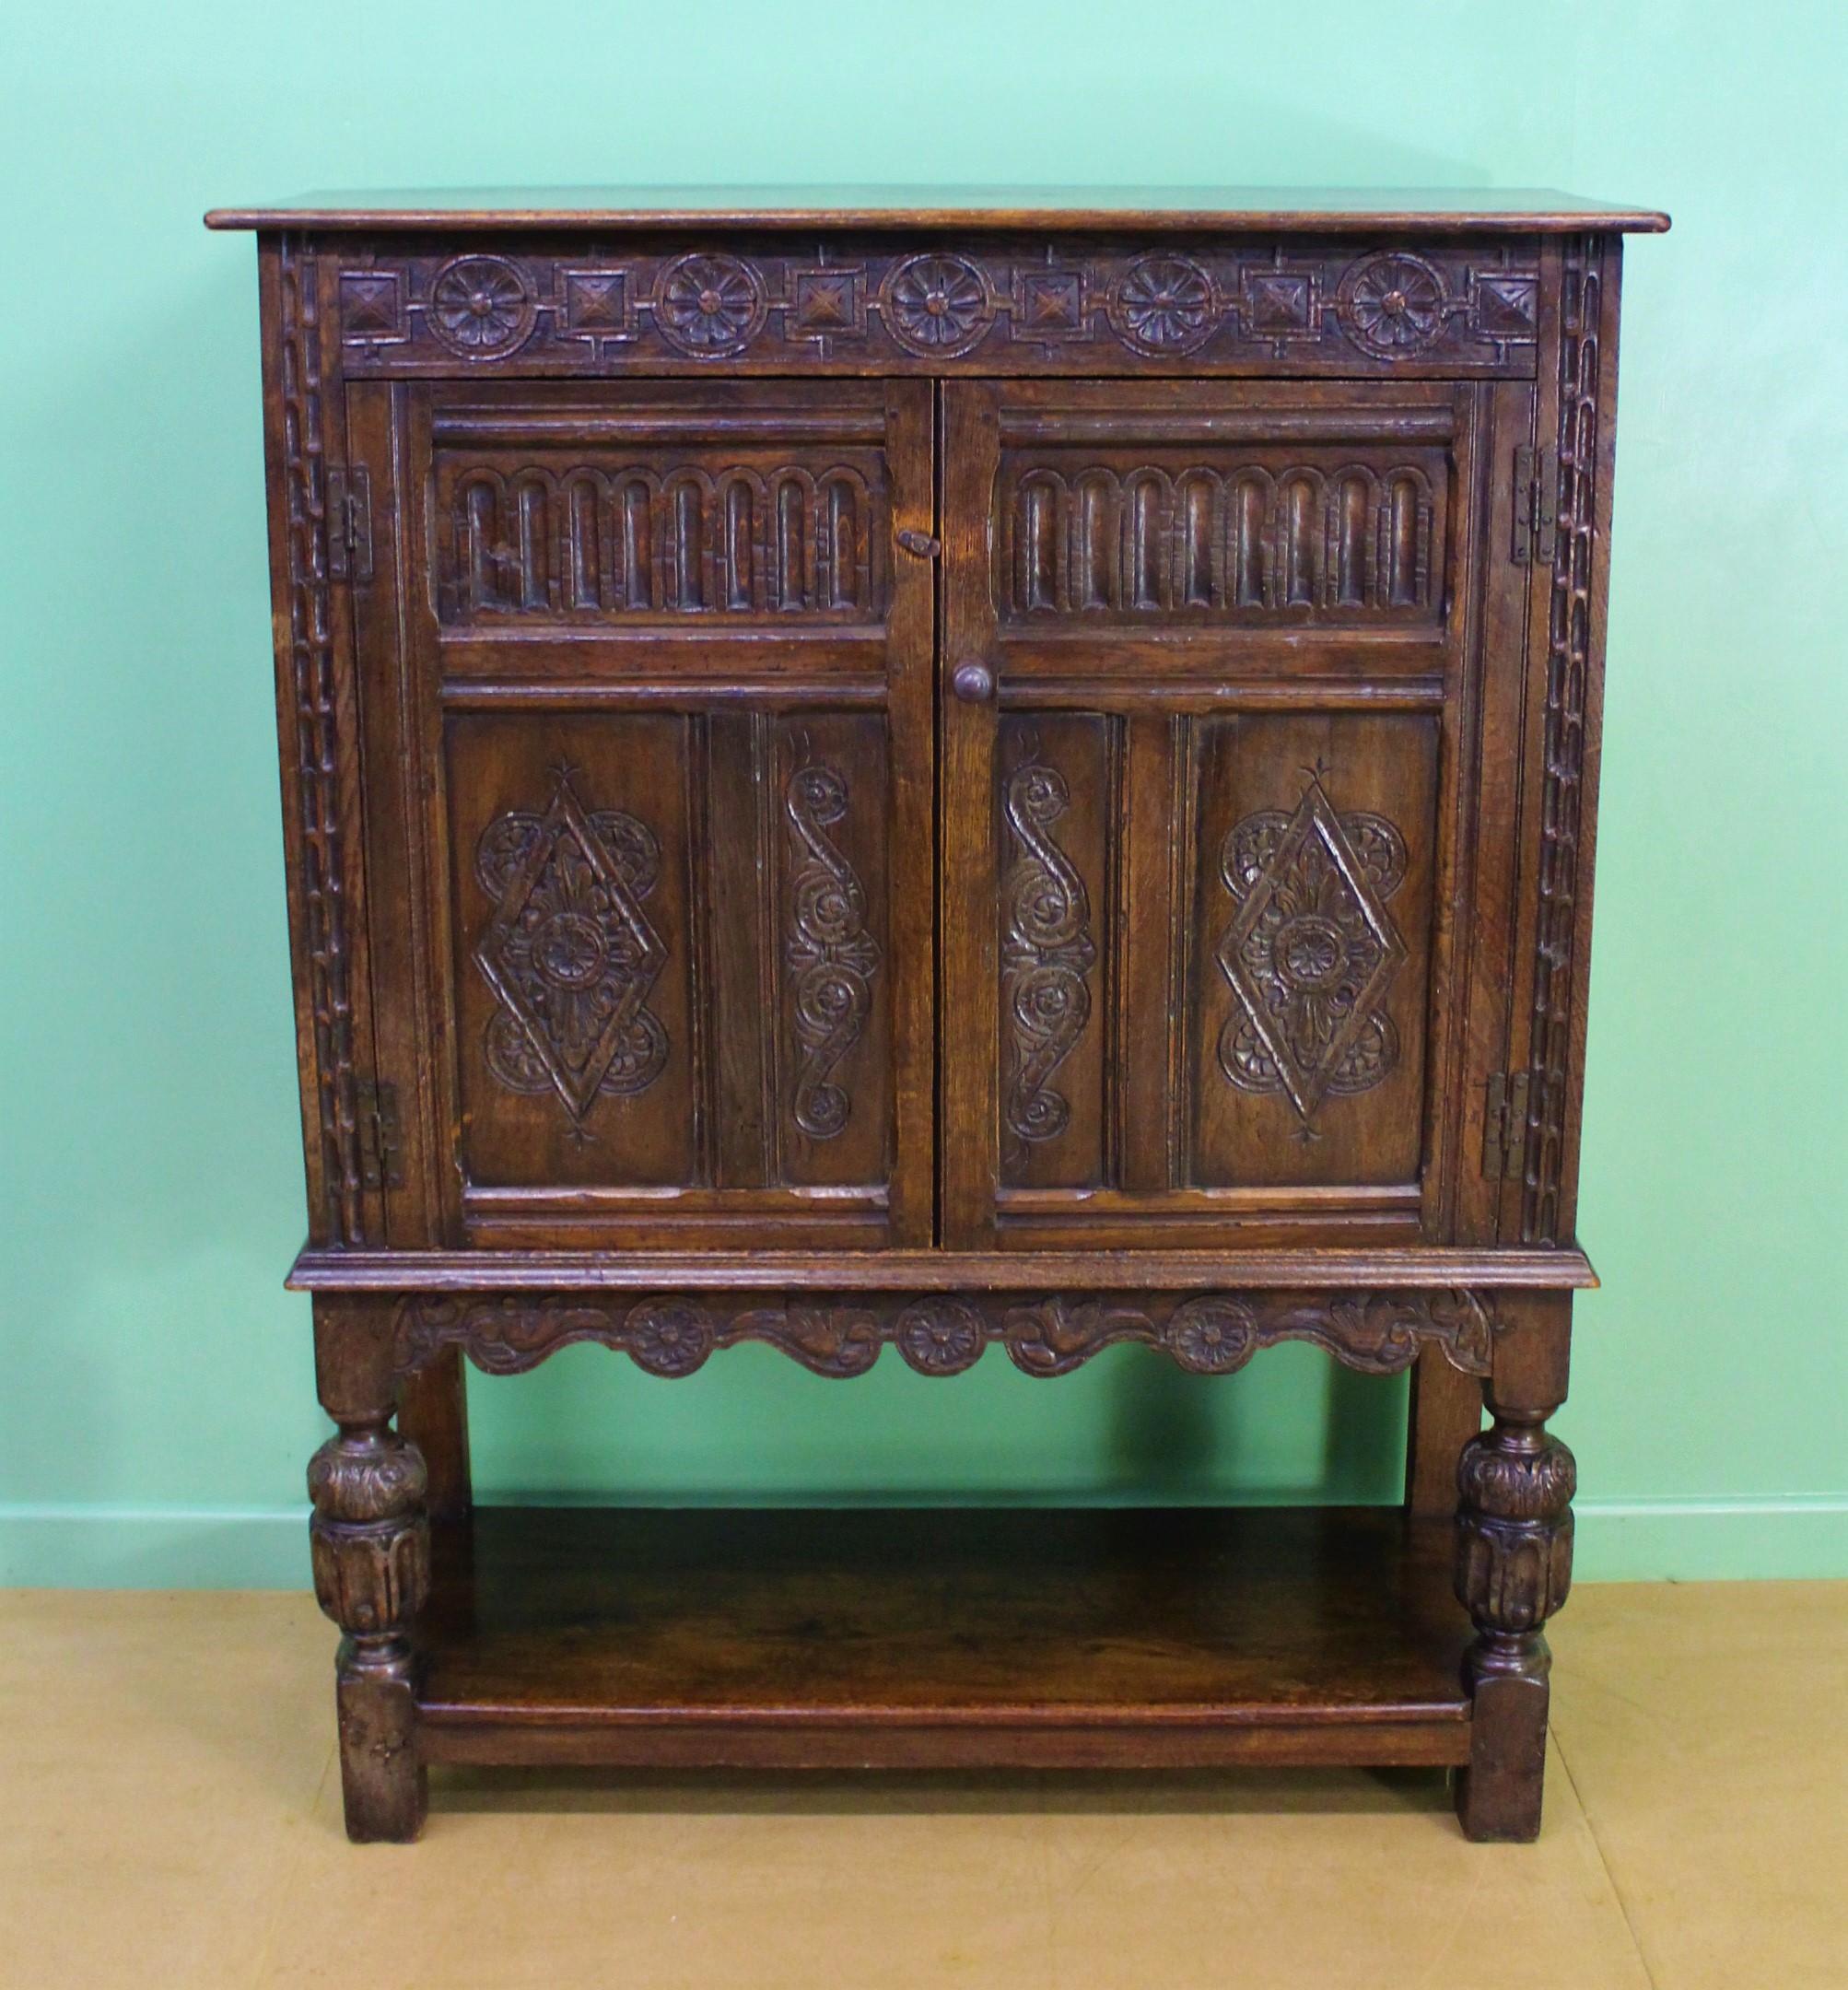 A solid oak 19th century carved oak cupboard of generous proportions. Of paneled construction with a pair of doors which open to access a shelved interior. With carved decorations and standing on turned baluster legs, united by an under-tier.